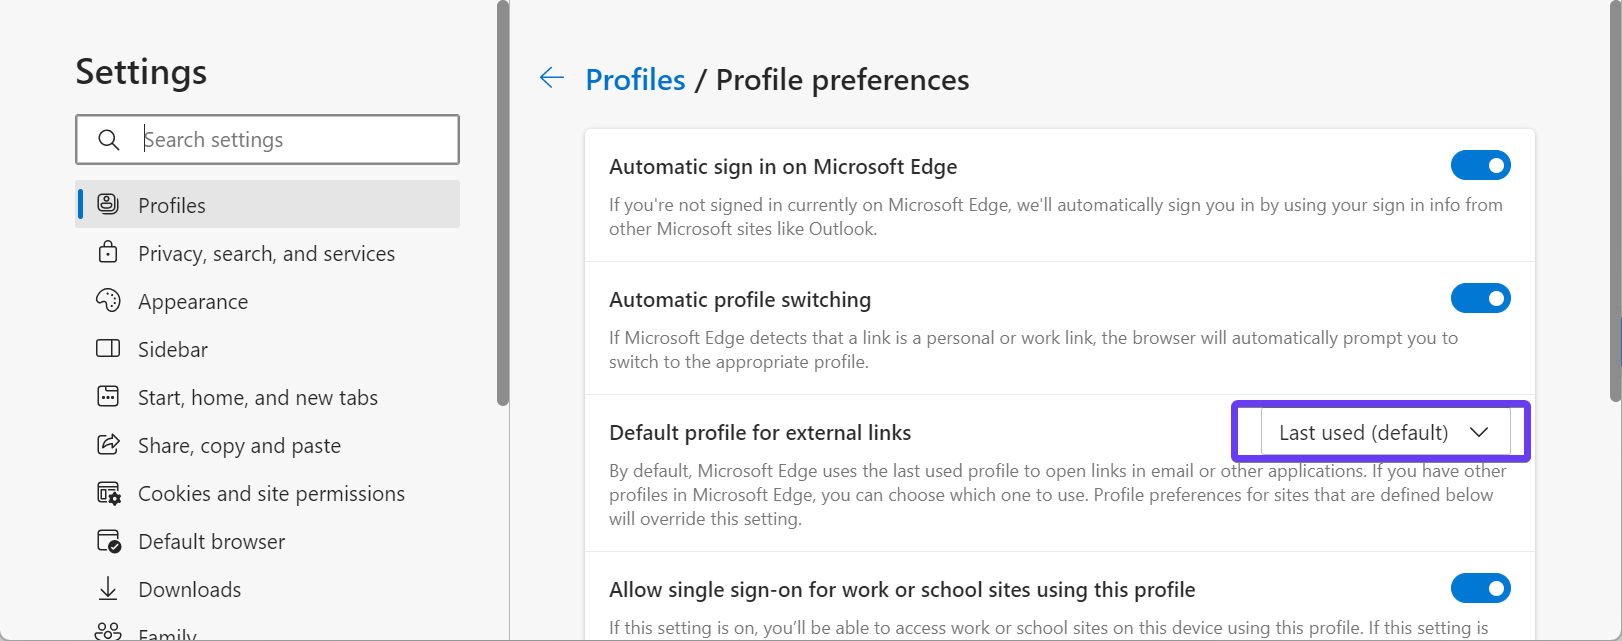 Microsoft Edge settings screen showing the default setting for the Default profile for external links property.